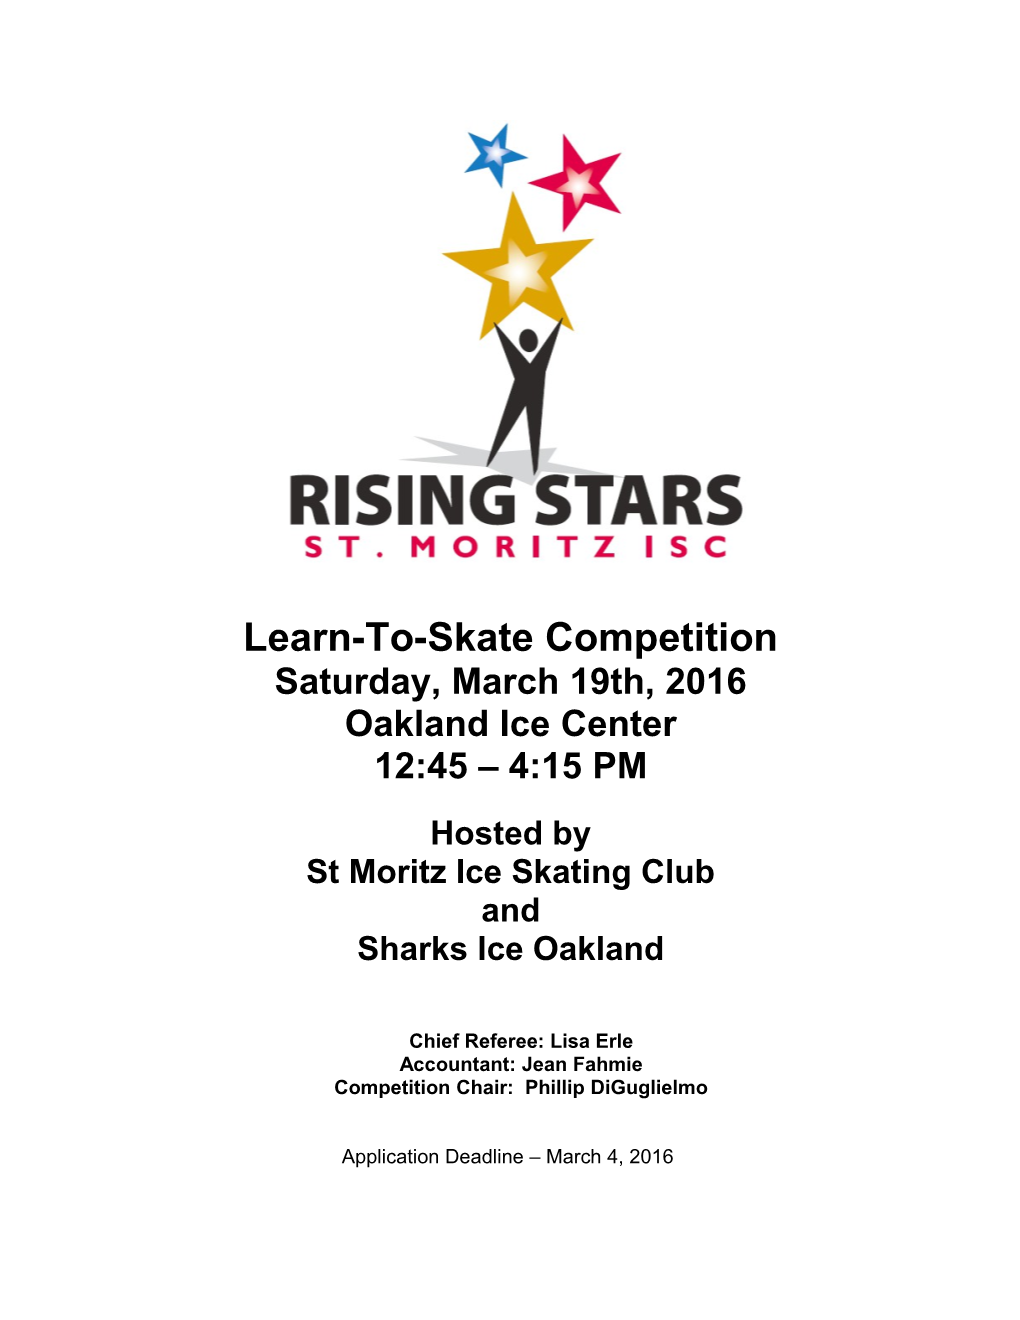 Learn-To-Skate Competition